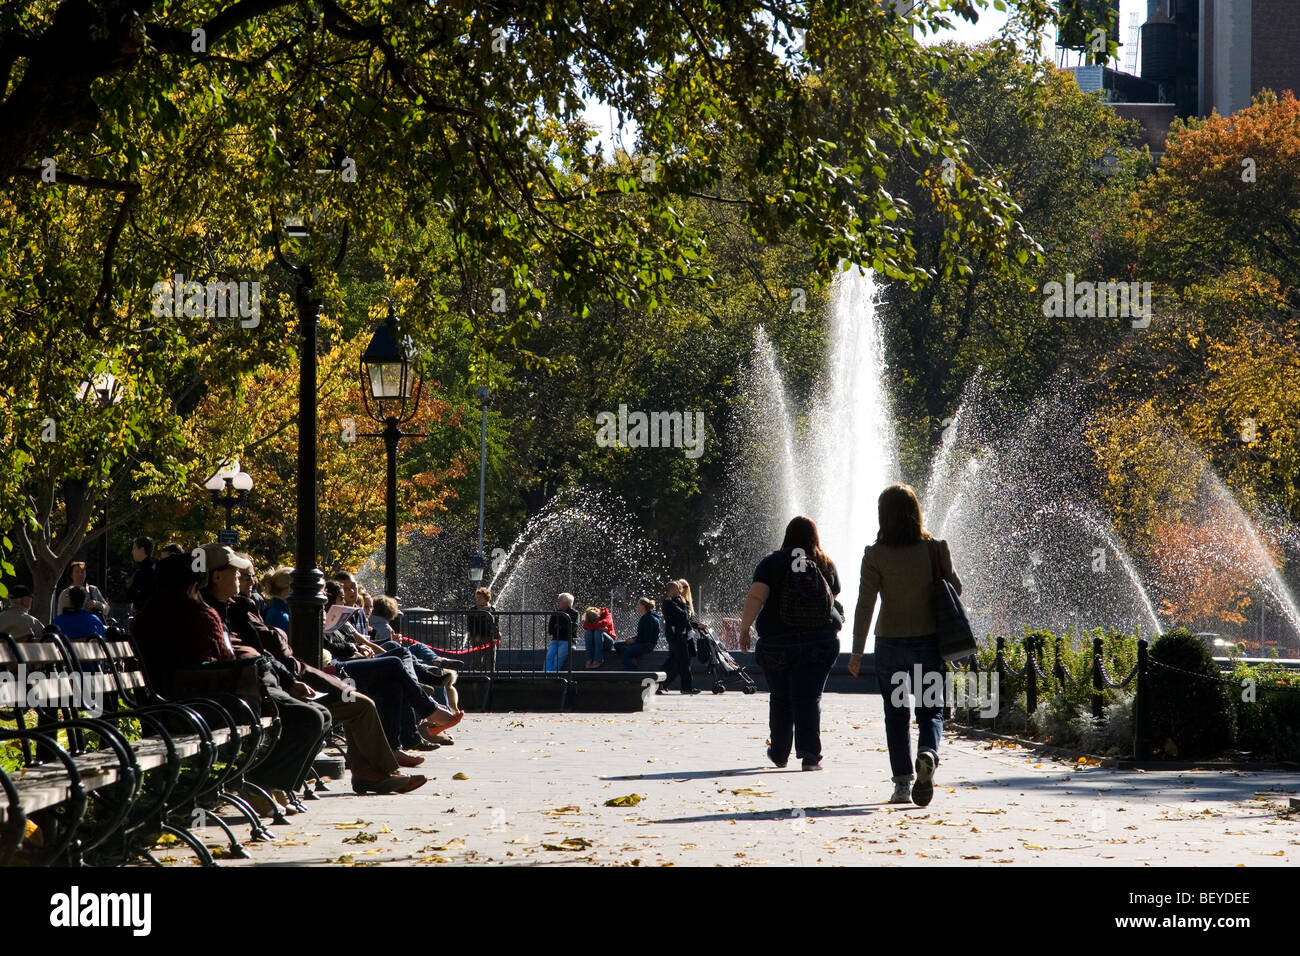 Early morning in Washington Square Park, Greenwich Village, New York City Stock Photo